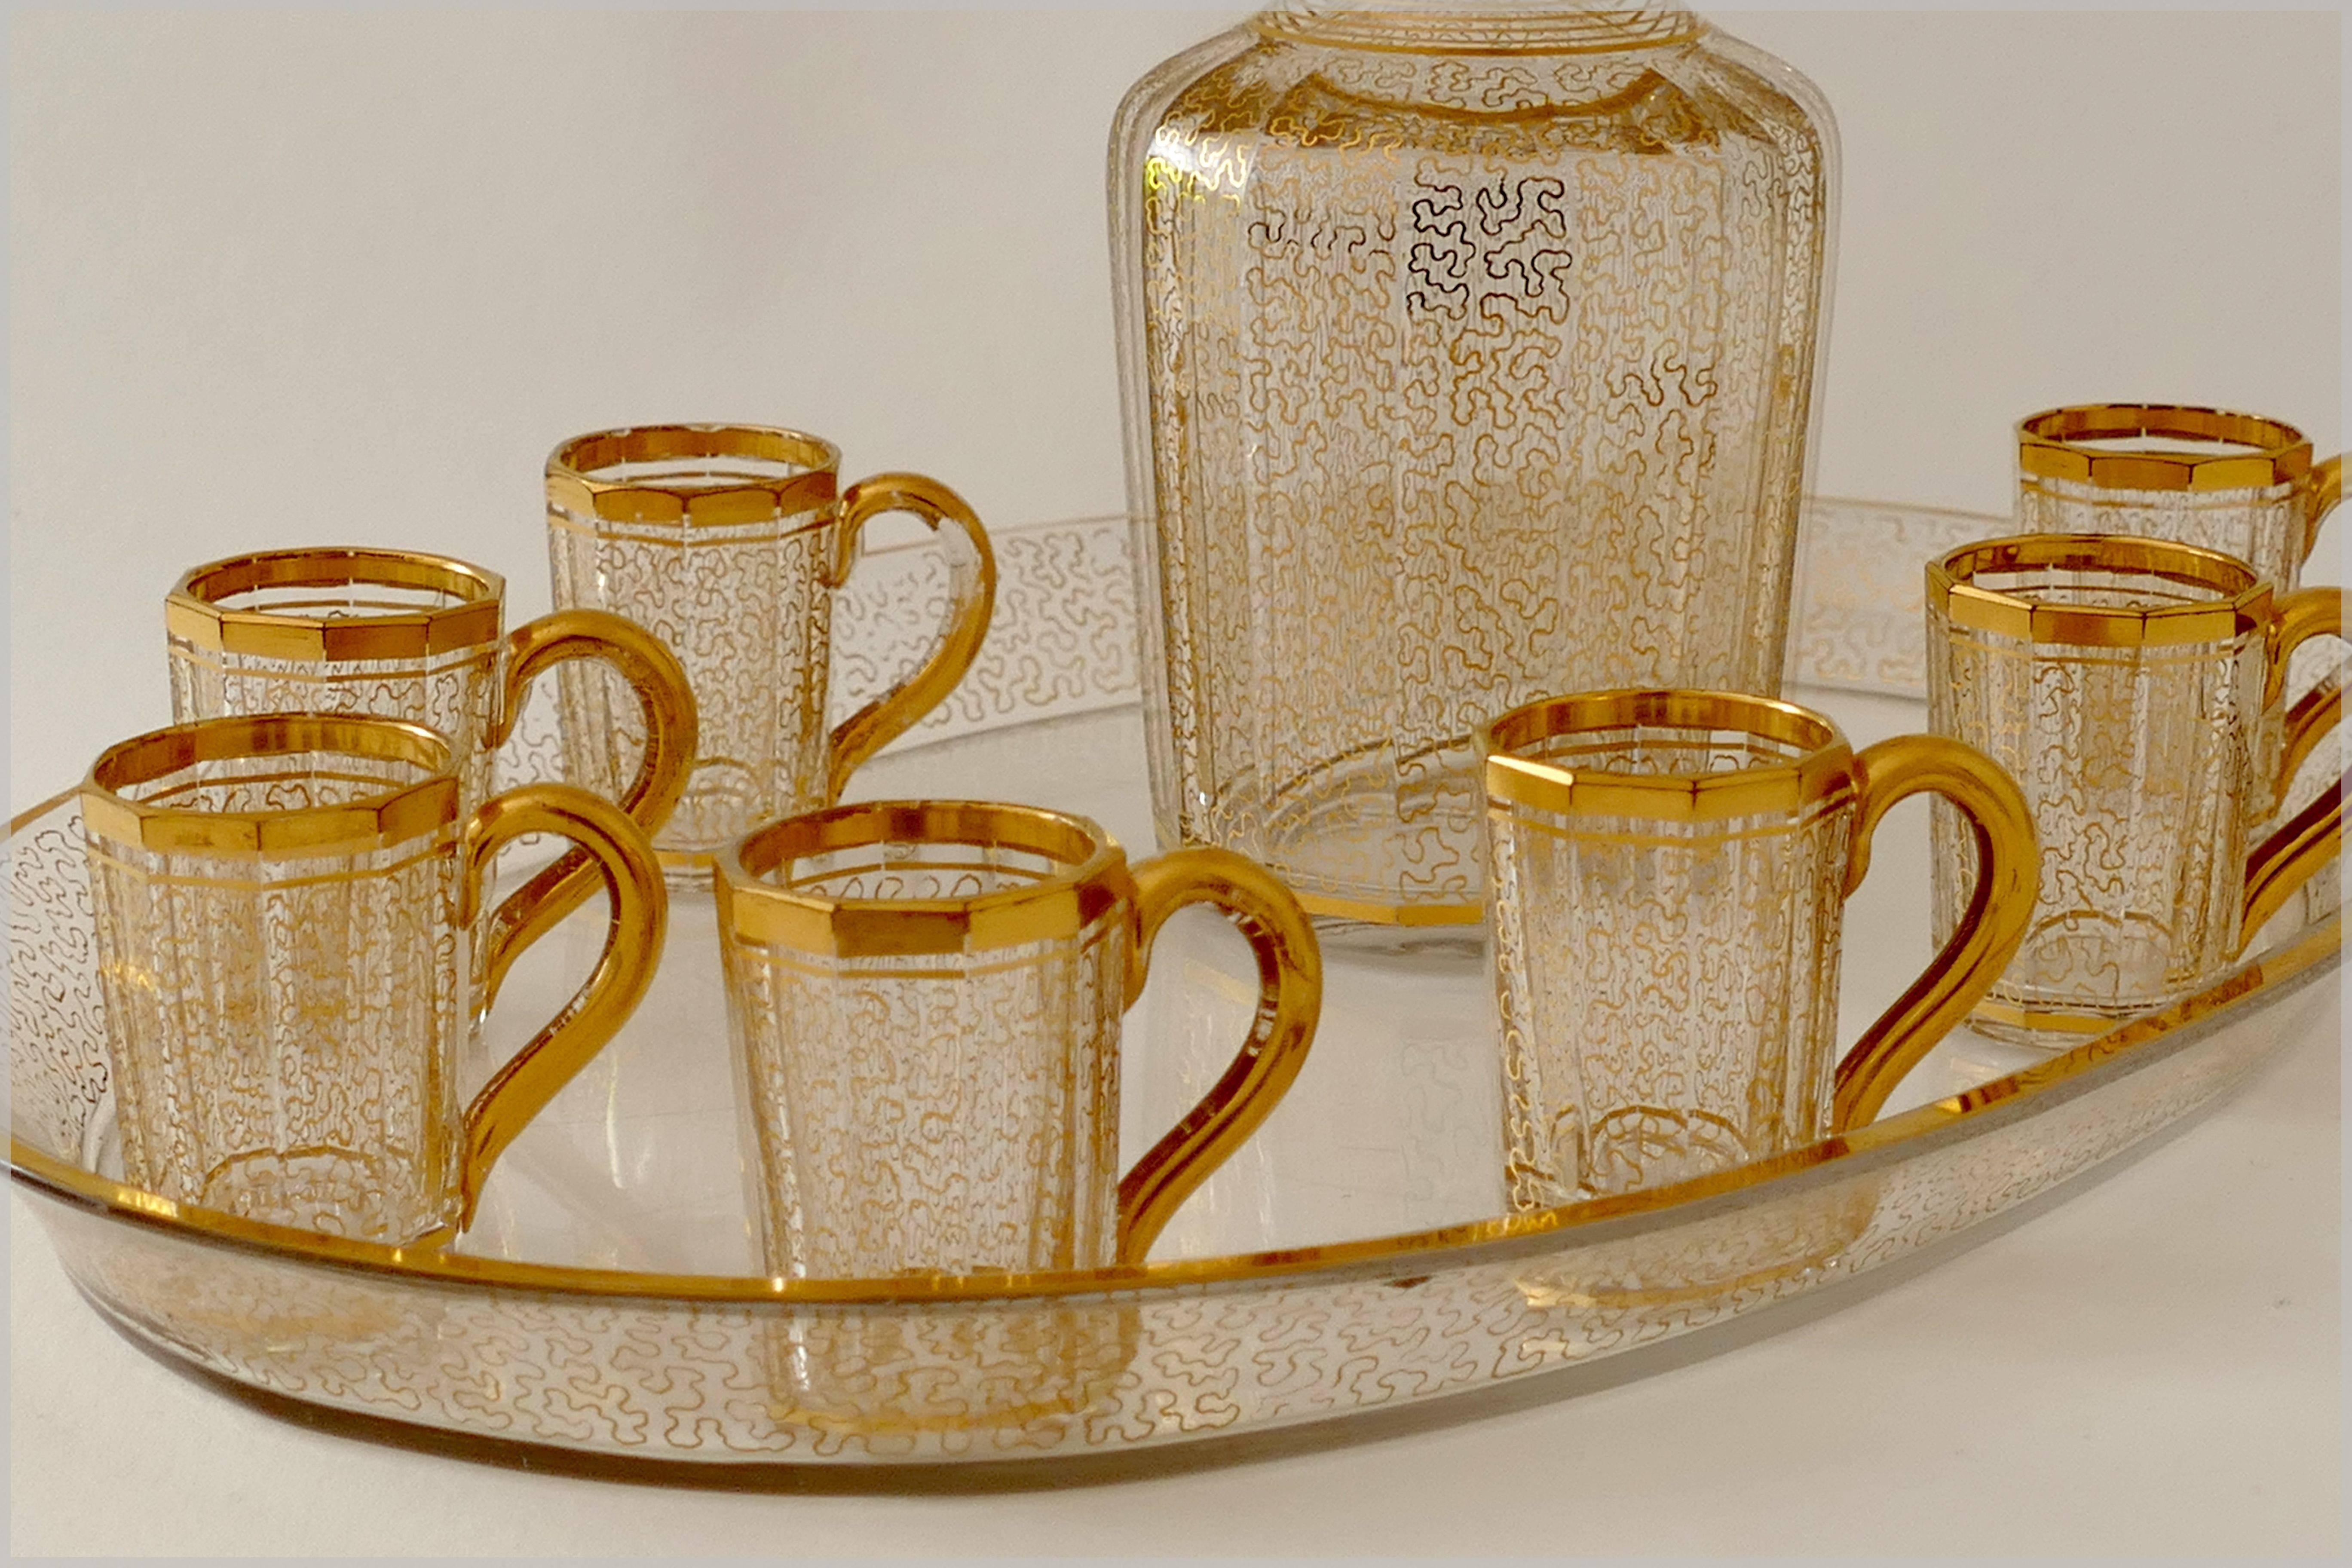 Napoleon III 1870 Rare French Baccarat Gold Crystal Liquor Service Decanter, Cups and Tray